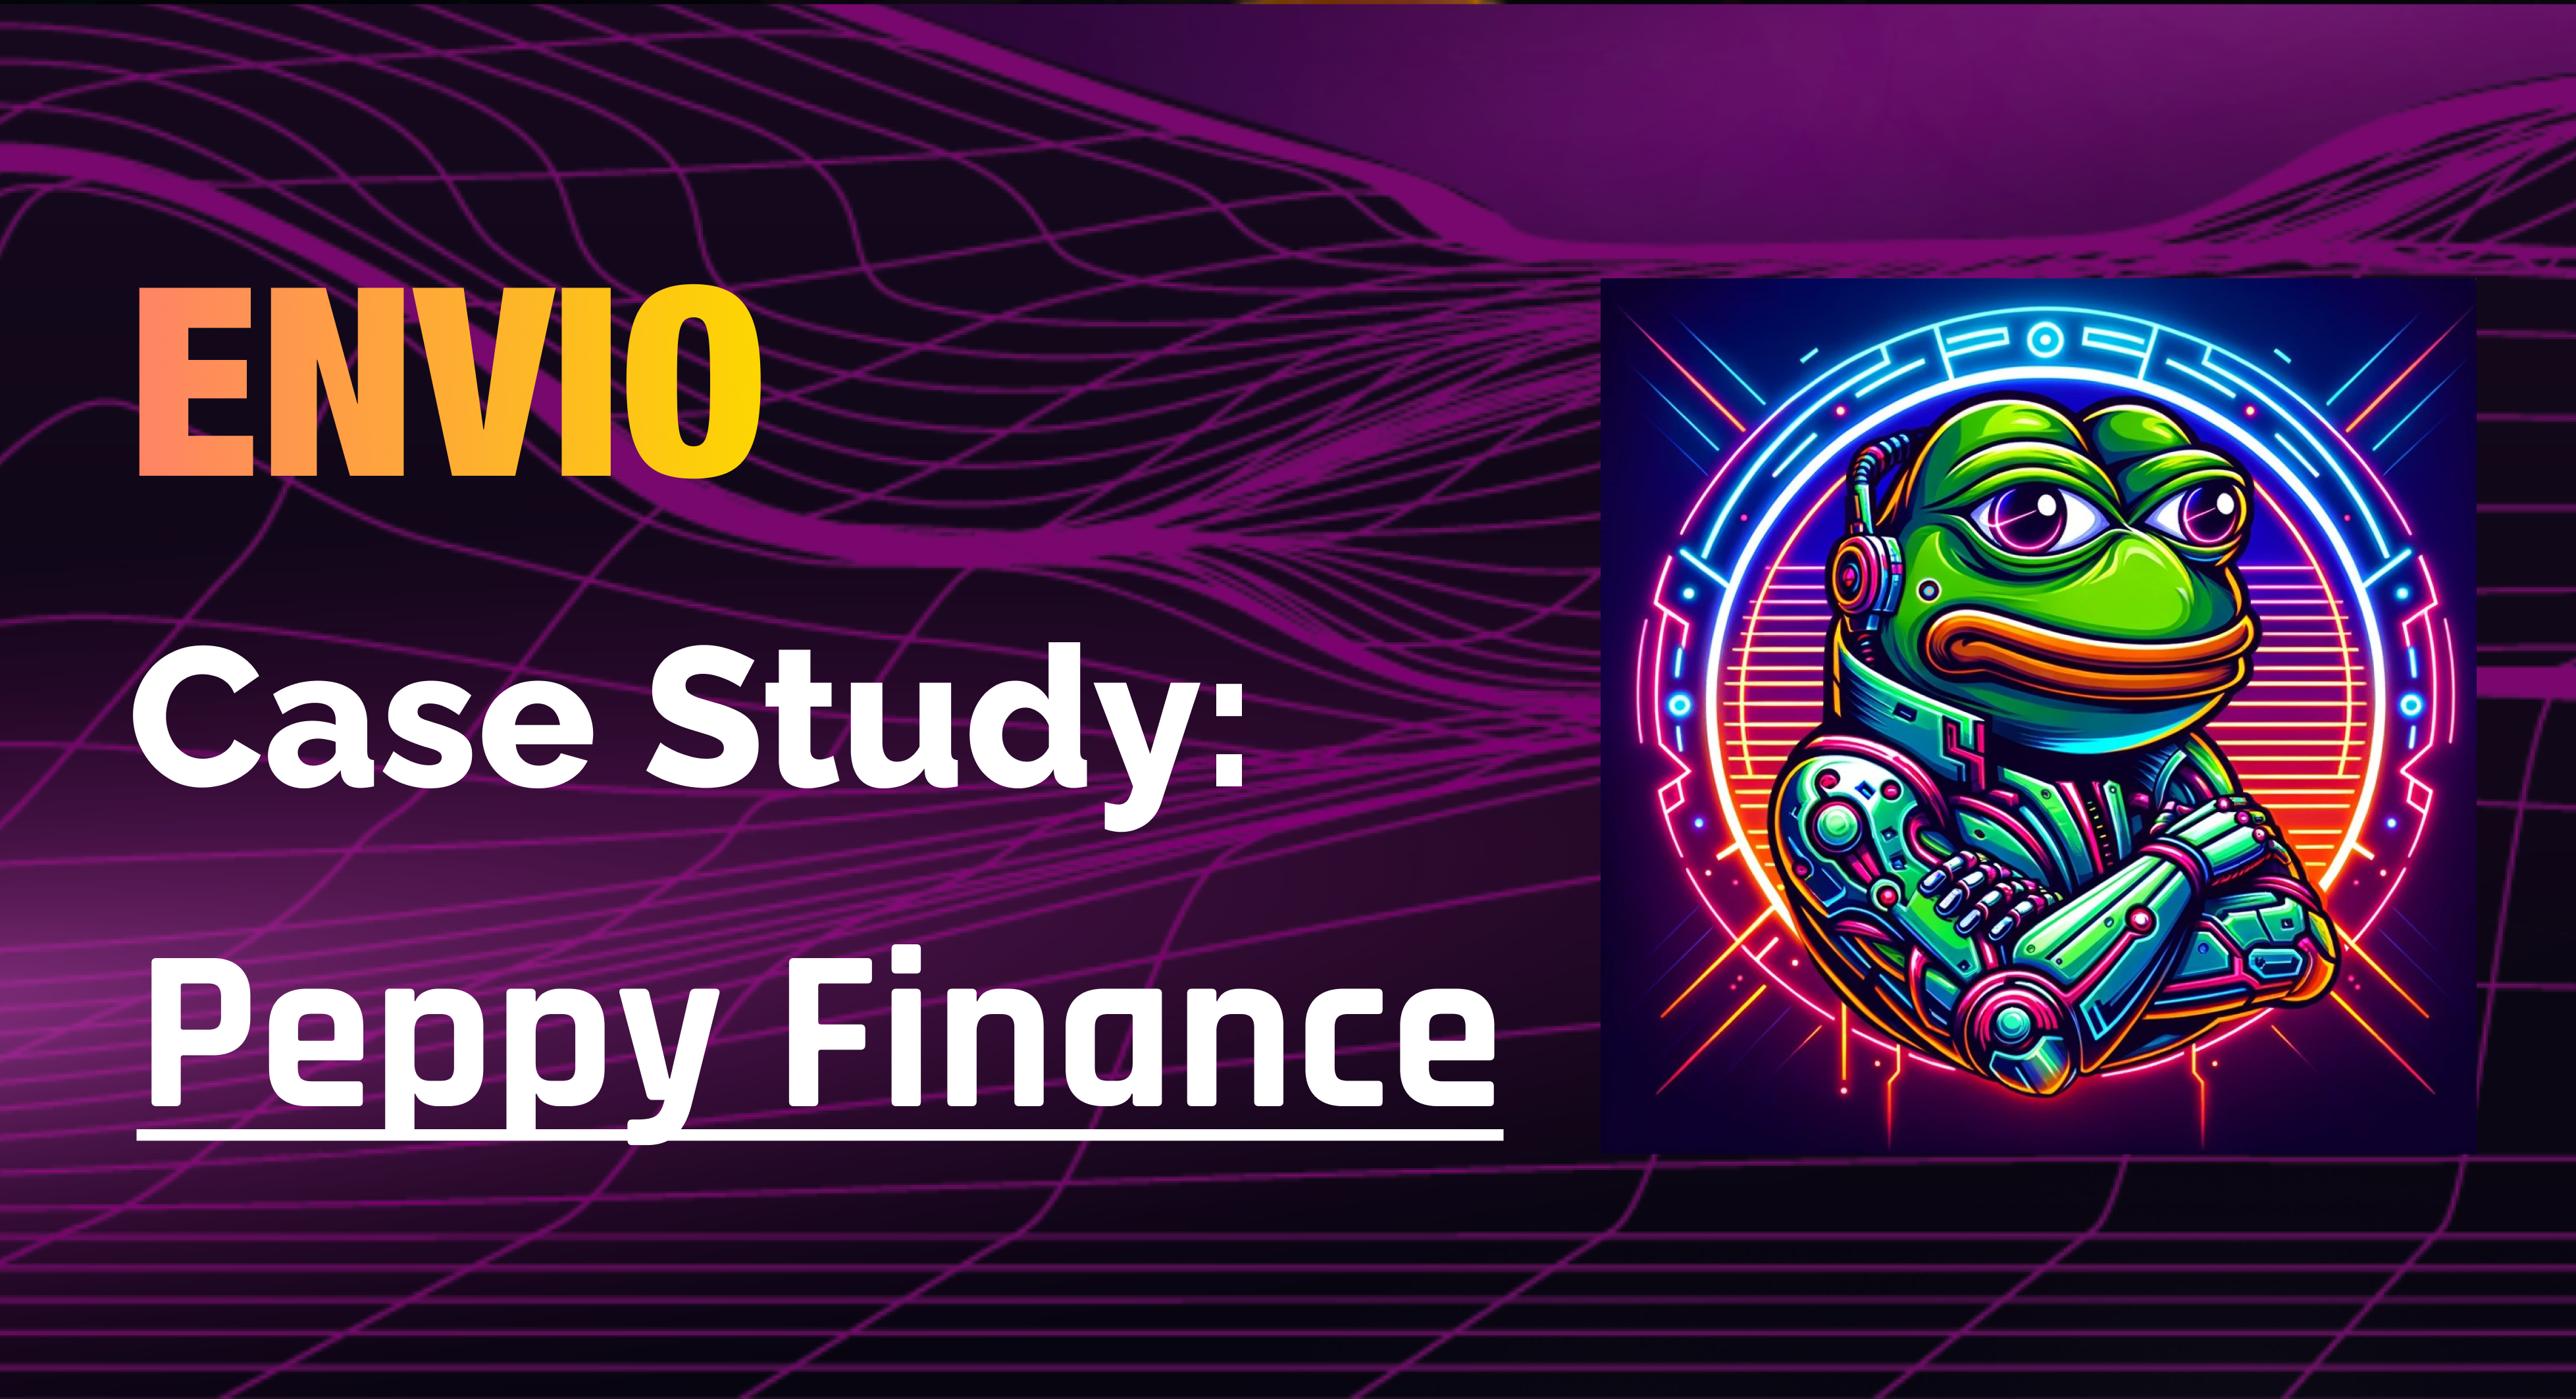 Cover Image for Case Study peppy Finance